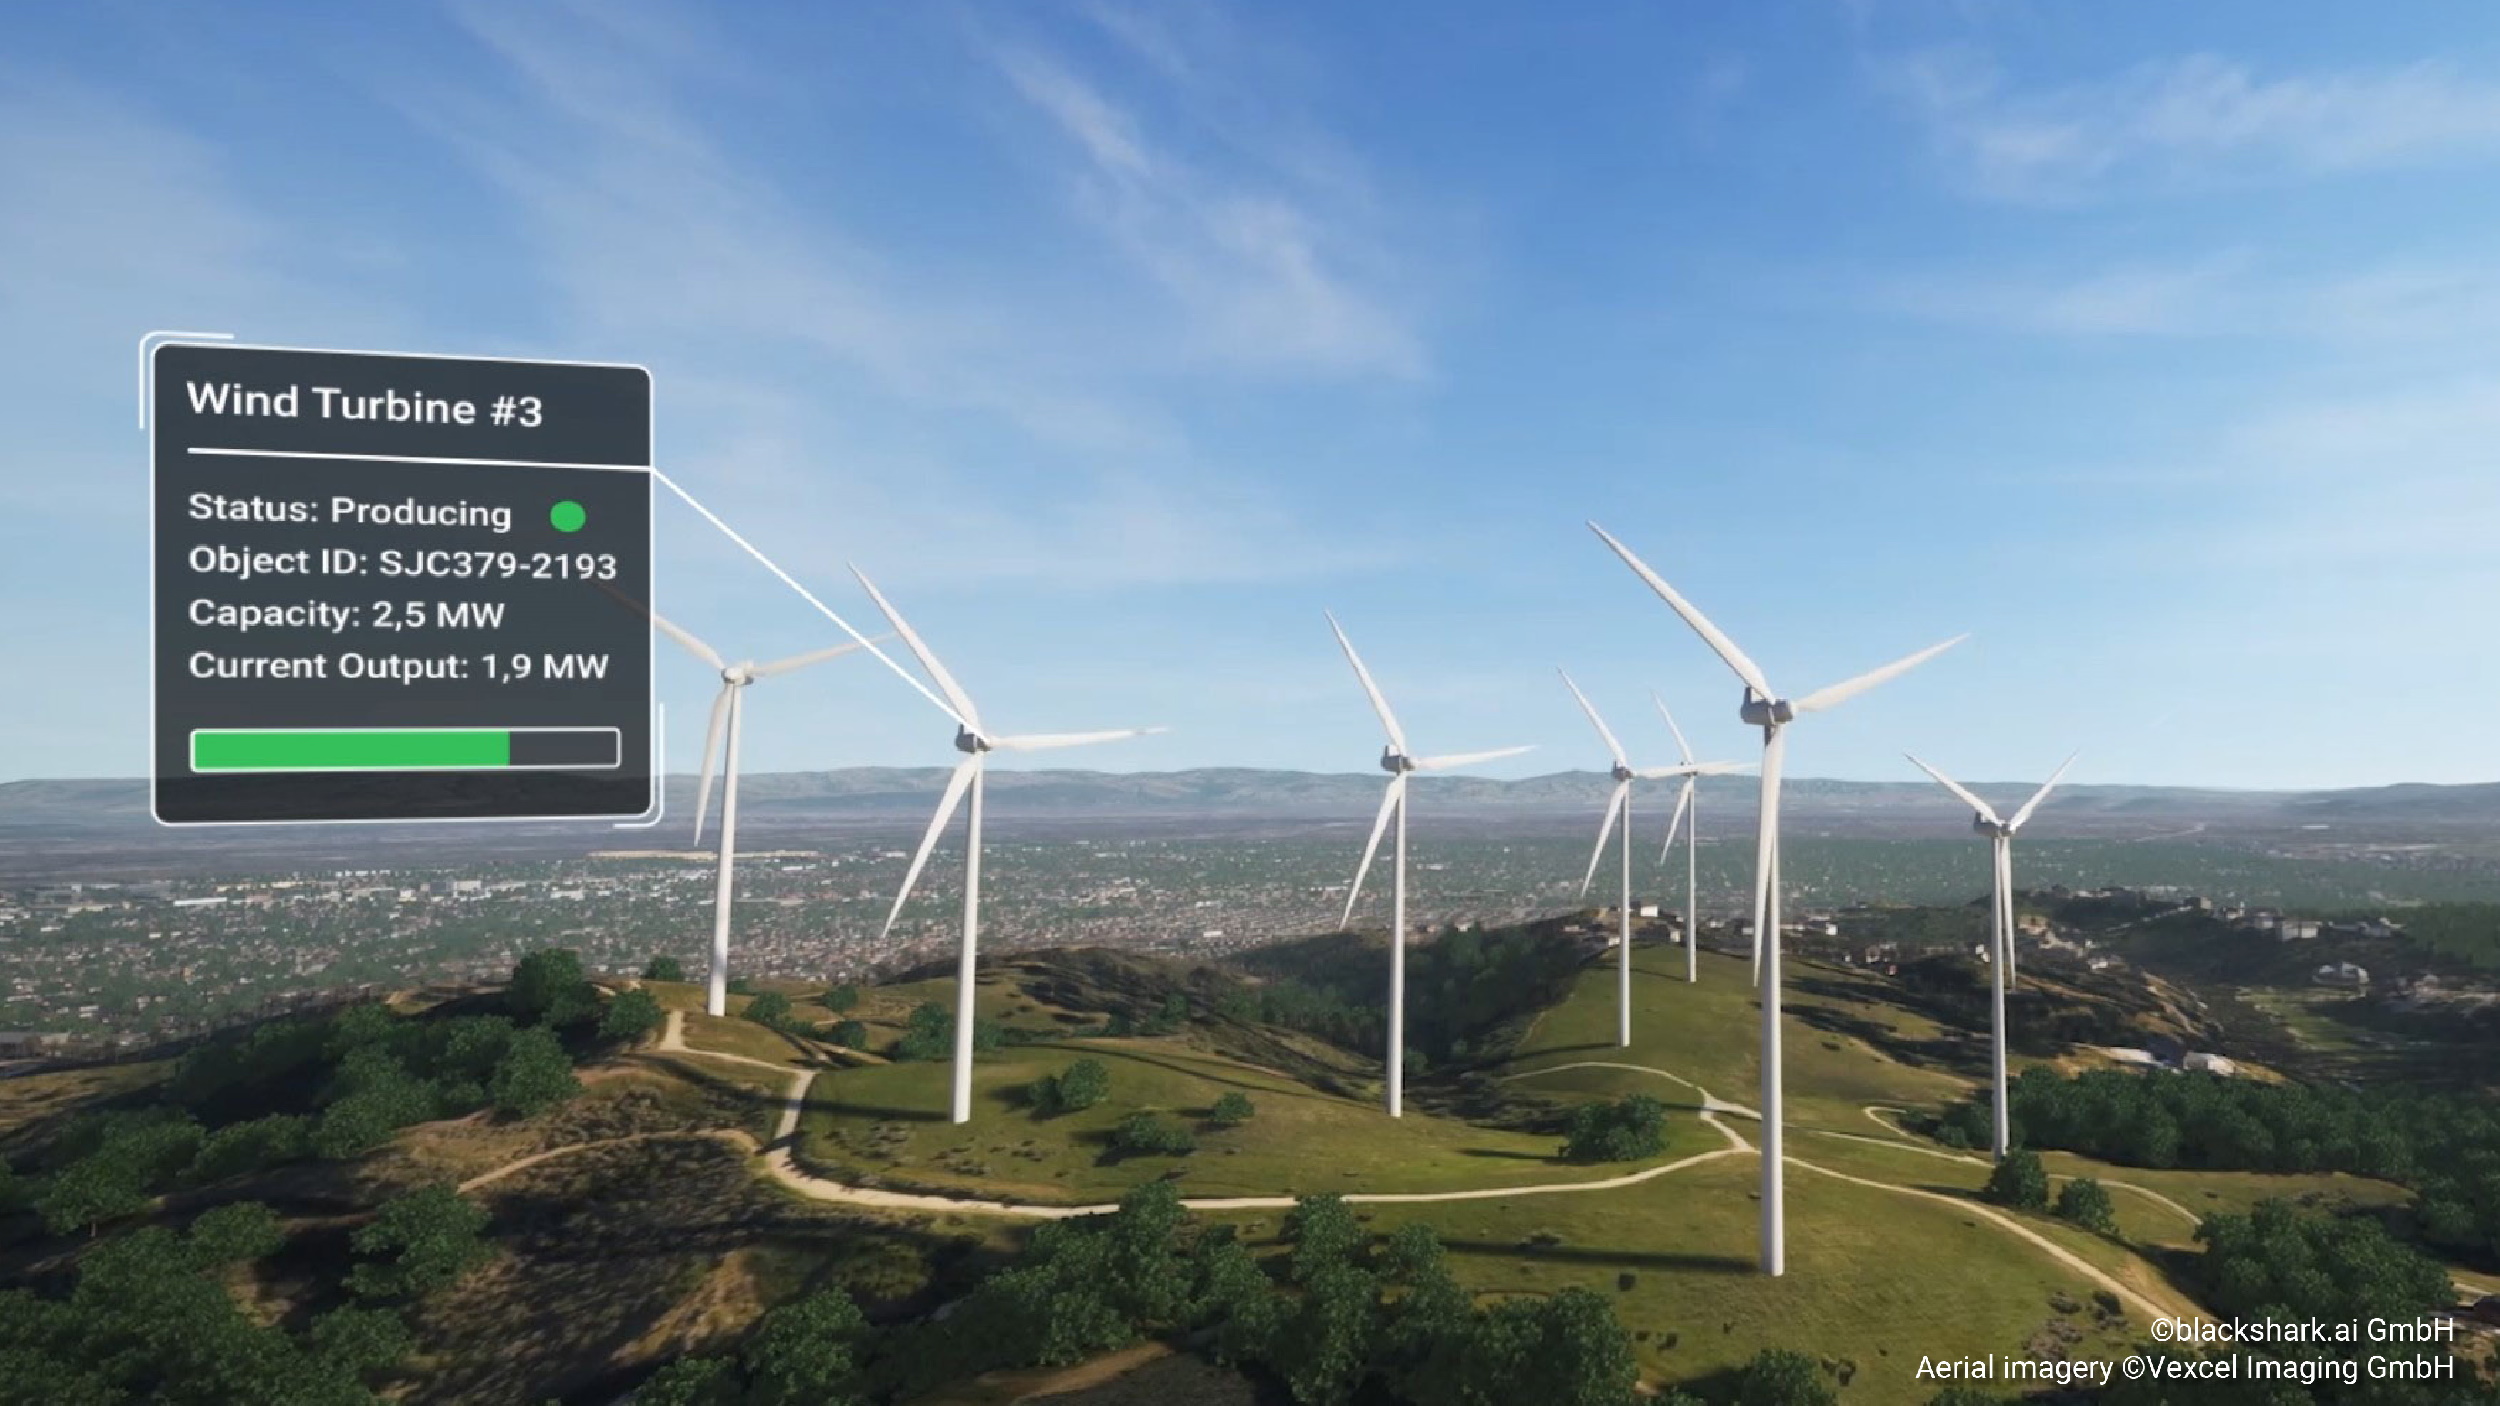 A digital recreation of a hillside with simulated windmills and data on their operations.